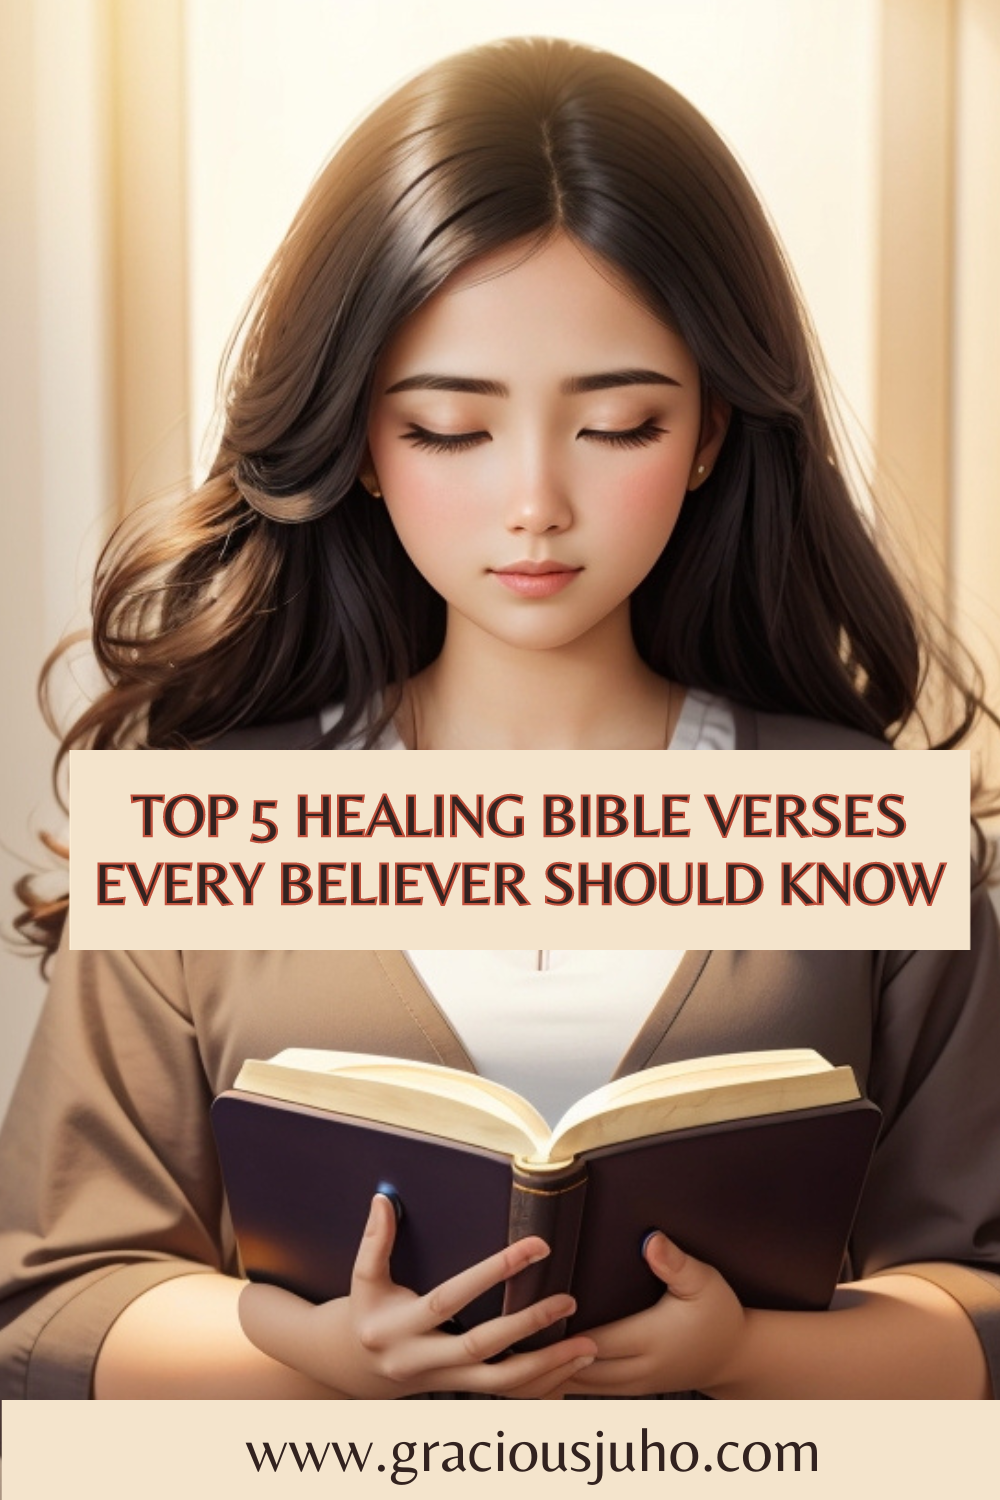 Top 5 Healing Bible Verses Every Believer Should Know